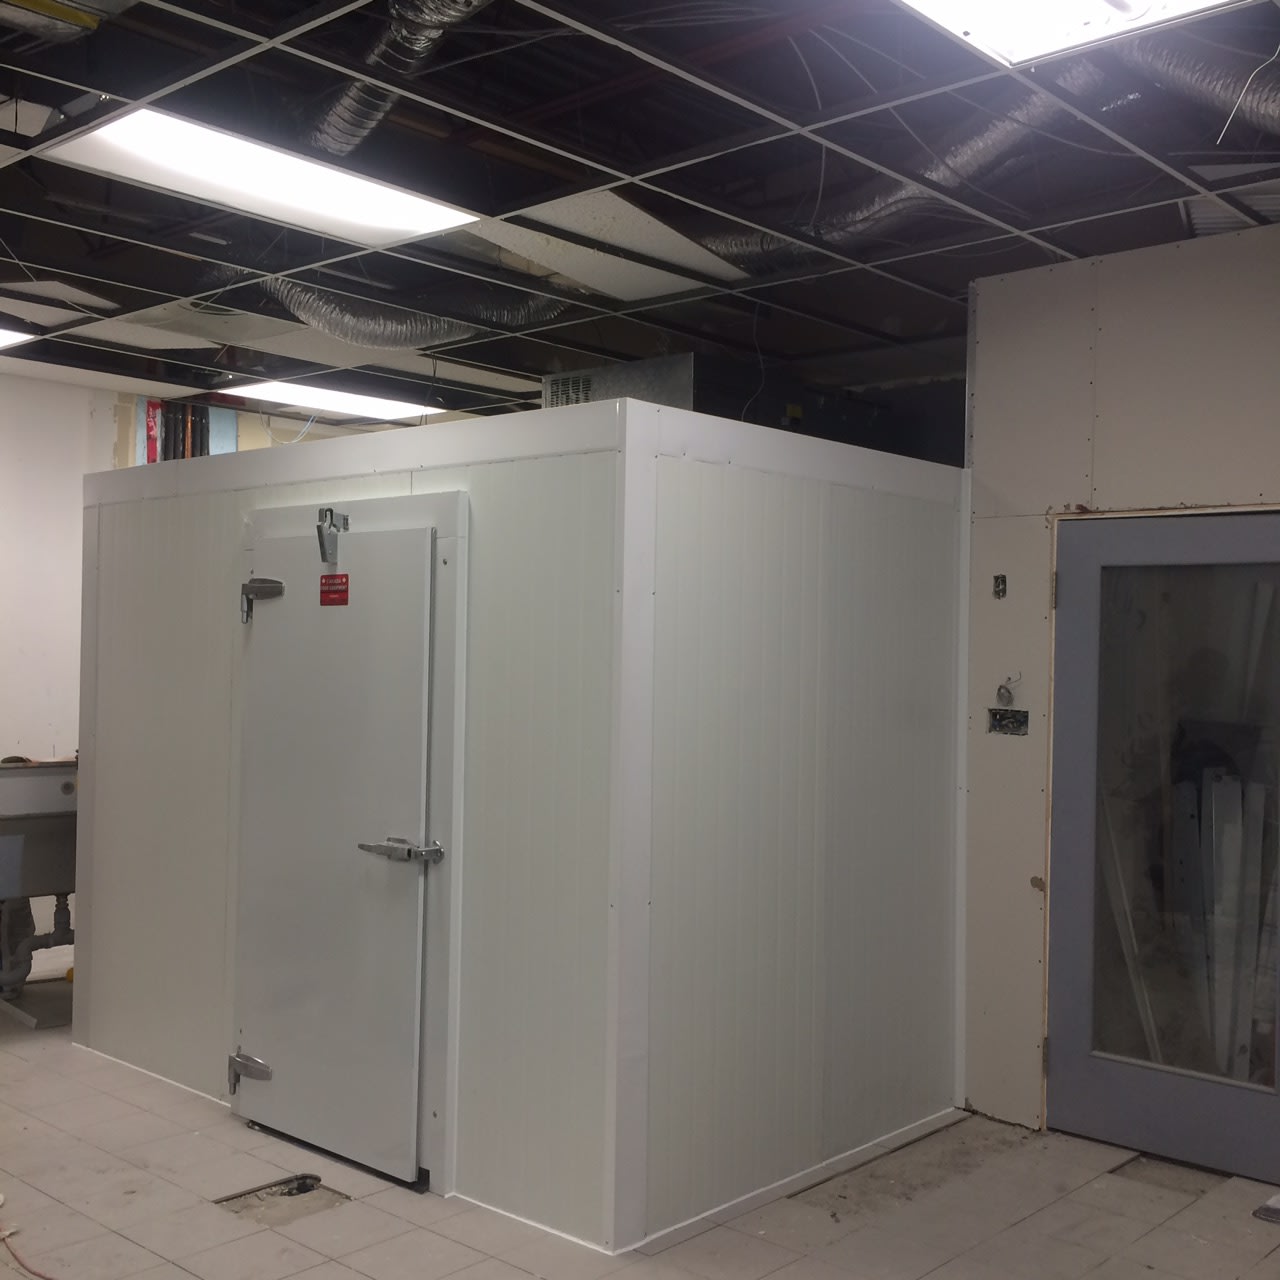 10x10x8H Walk-In Cooler - Self Contained (NEW) - C10108NSC